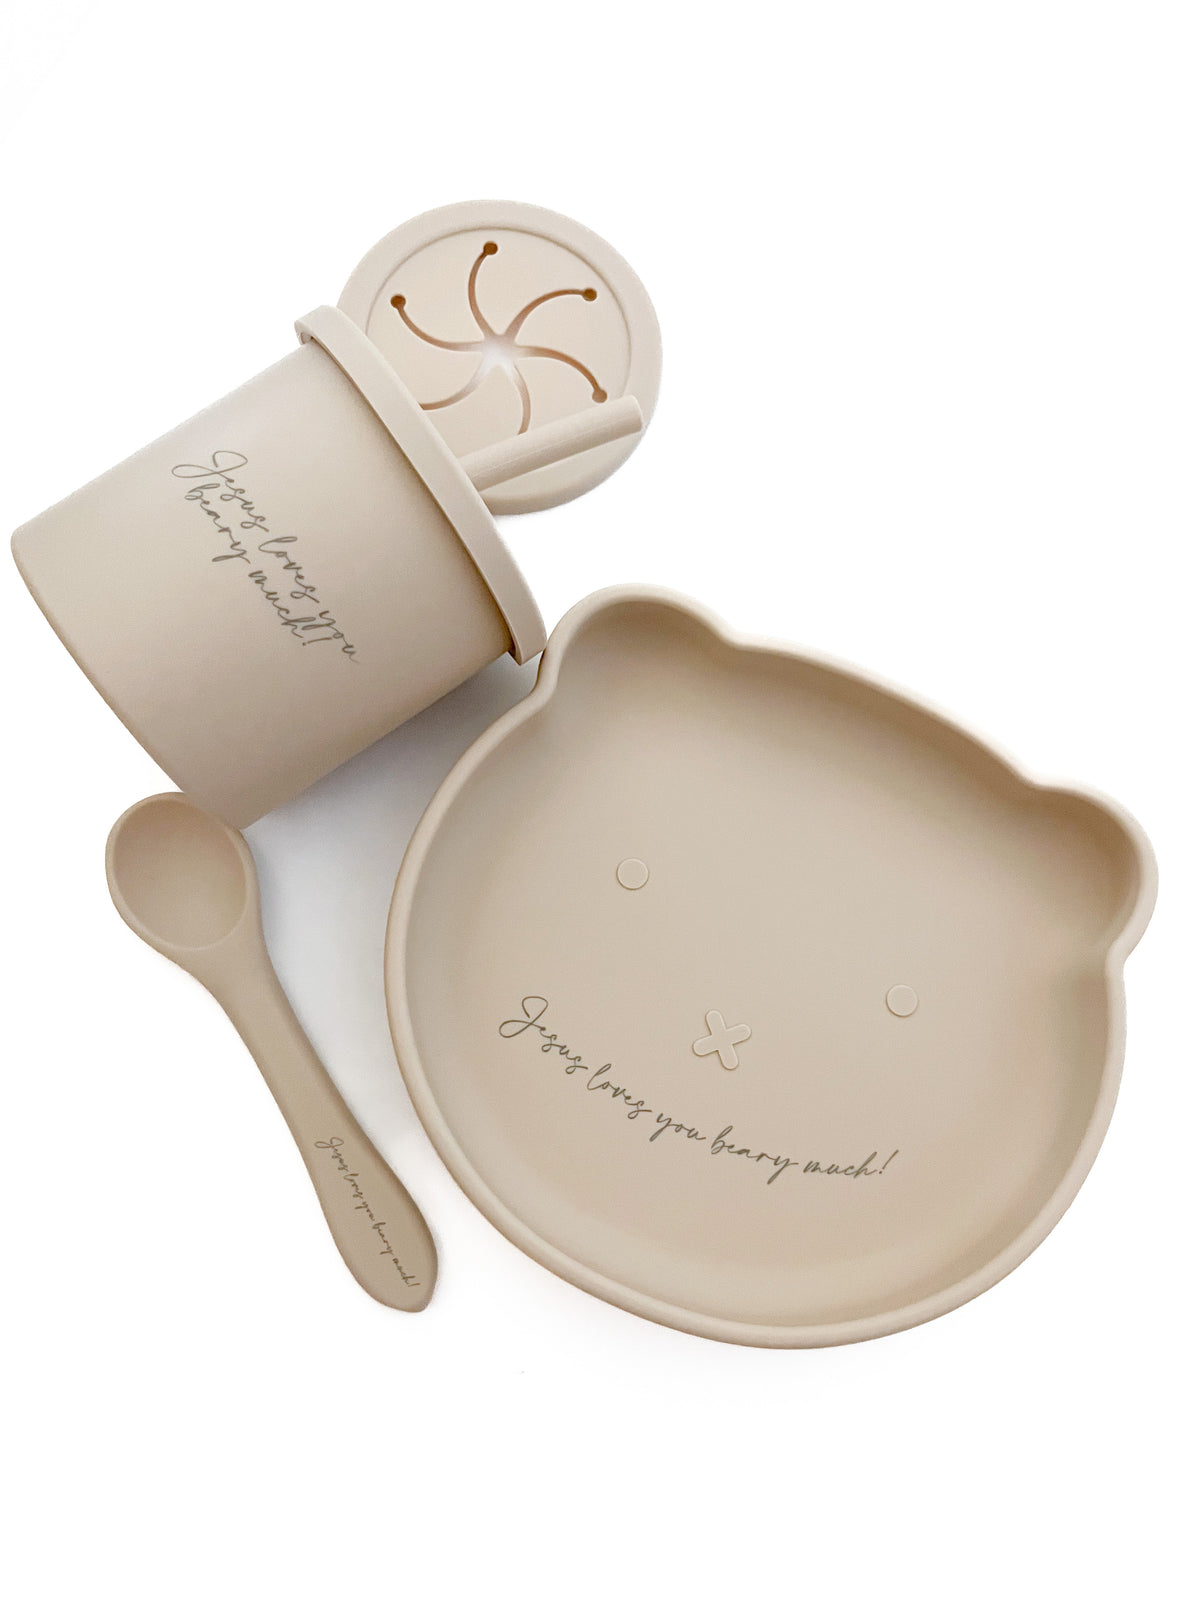 Jesus Loves You Beary Much Cup, Plate & Spoon Set